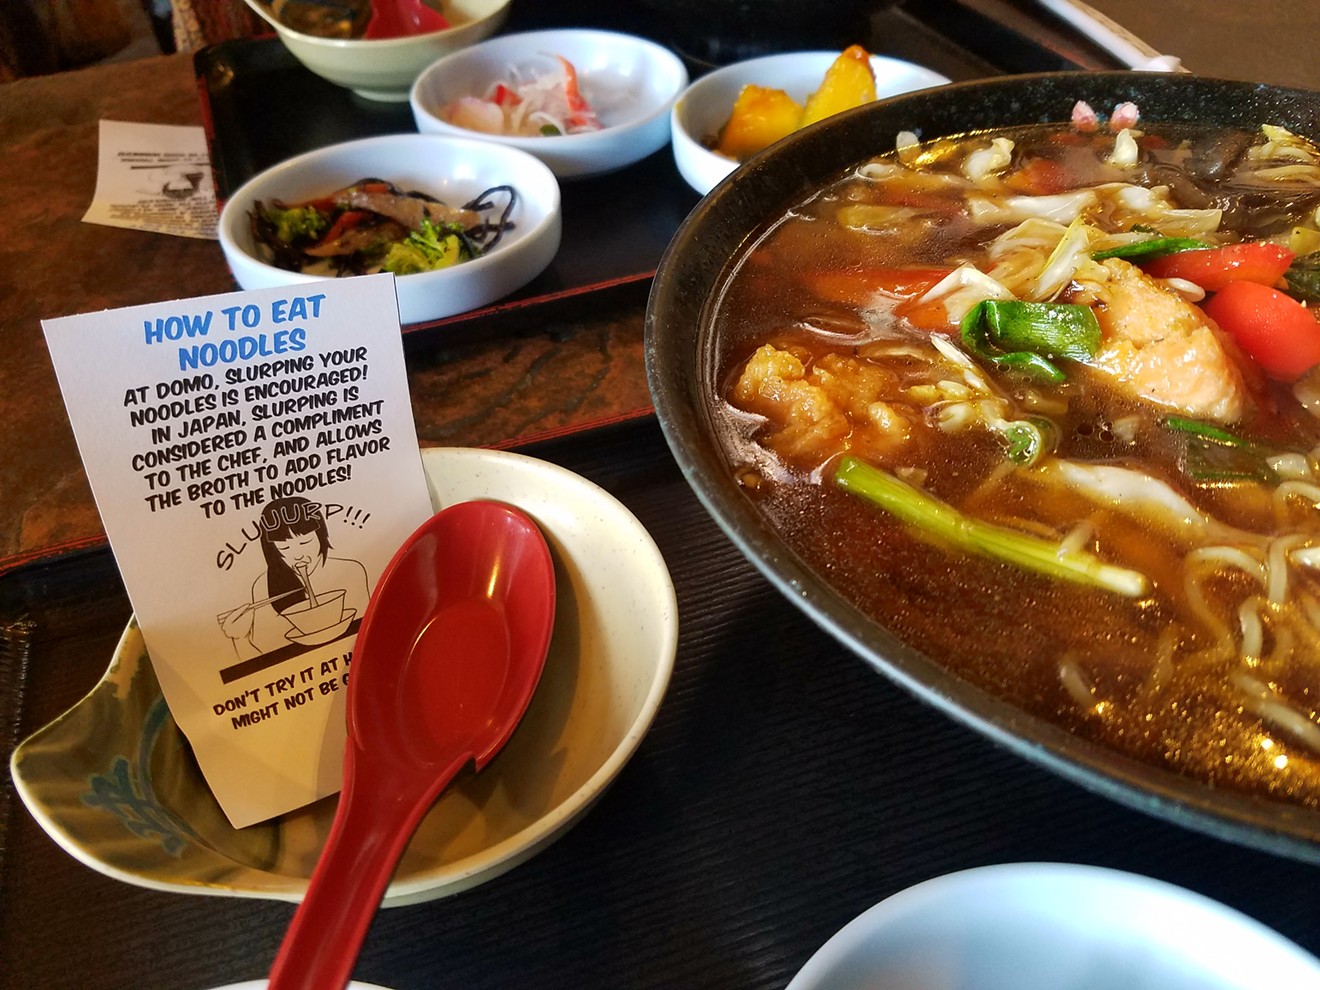 Getting ramen at Domo comes with instructions.